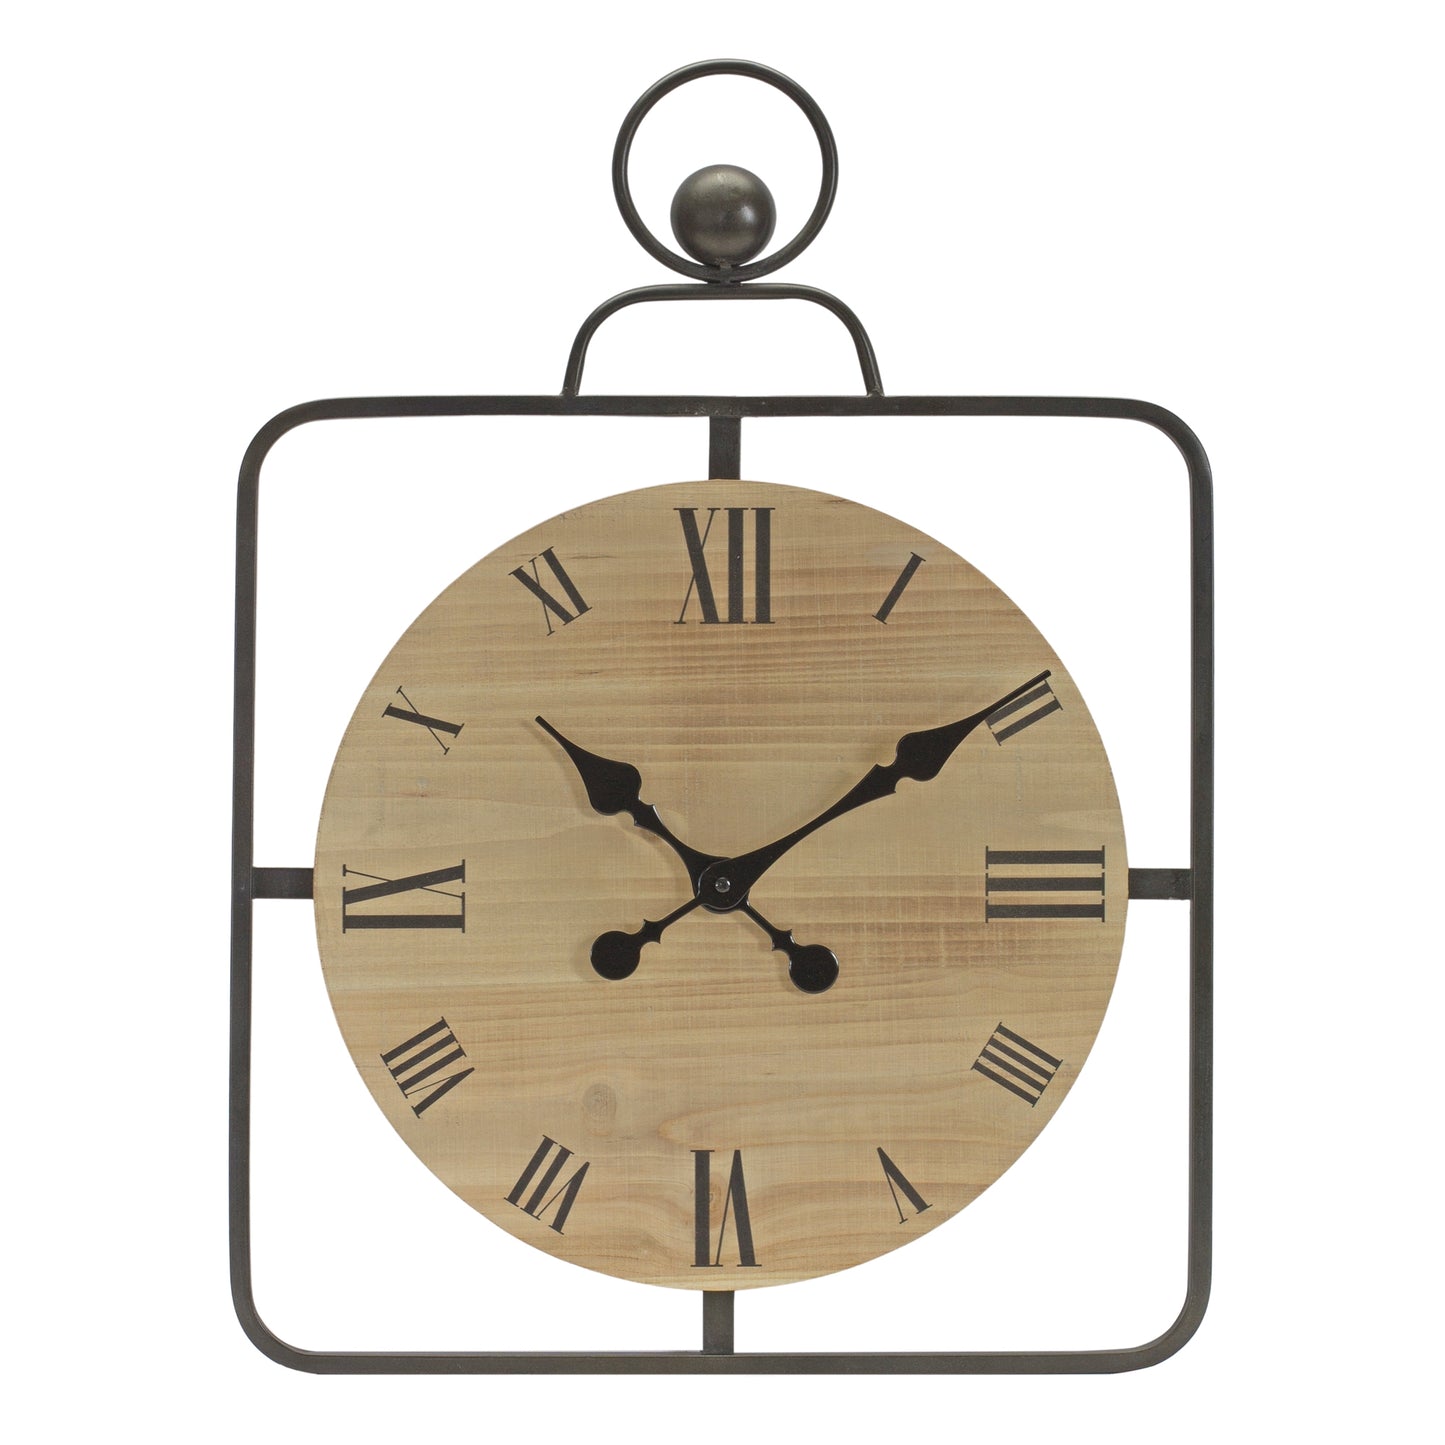 Wall Clock 18"L x 24.5"H Iron/Wood 1 AA Battery, Not Included